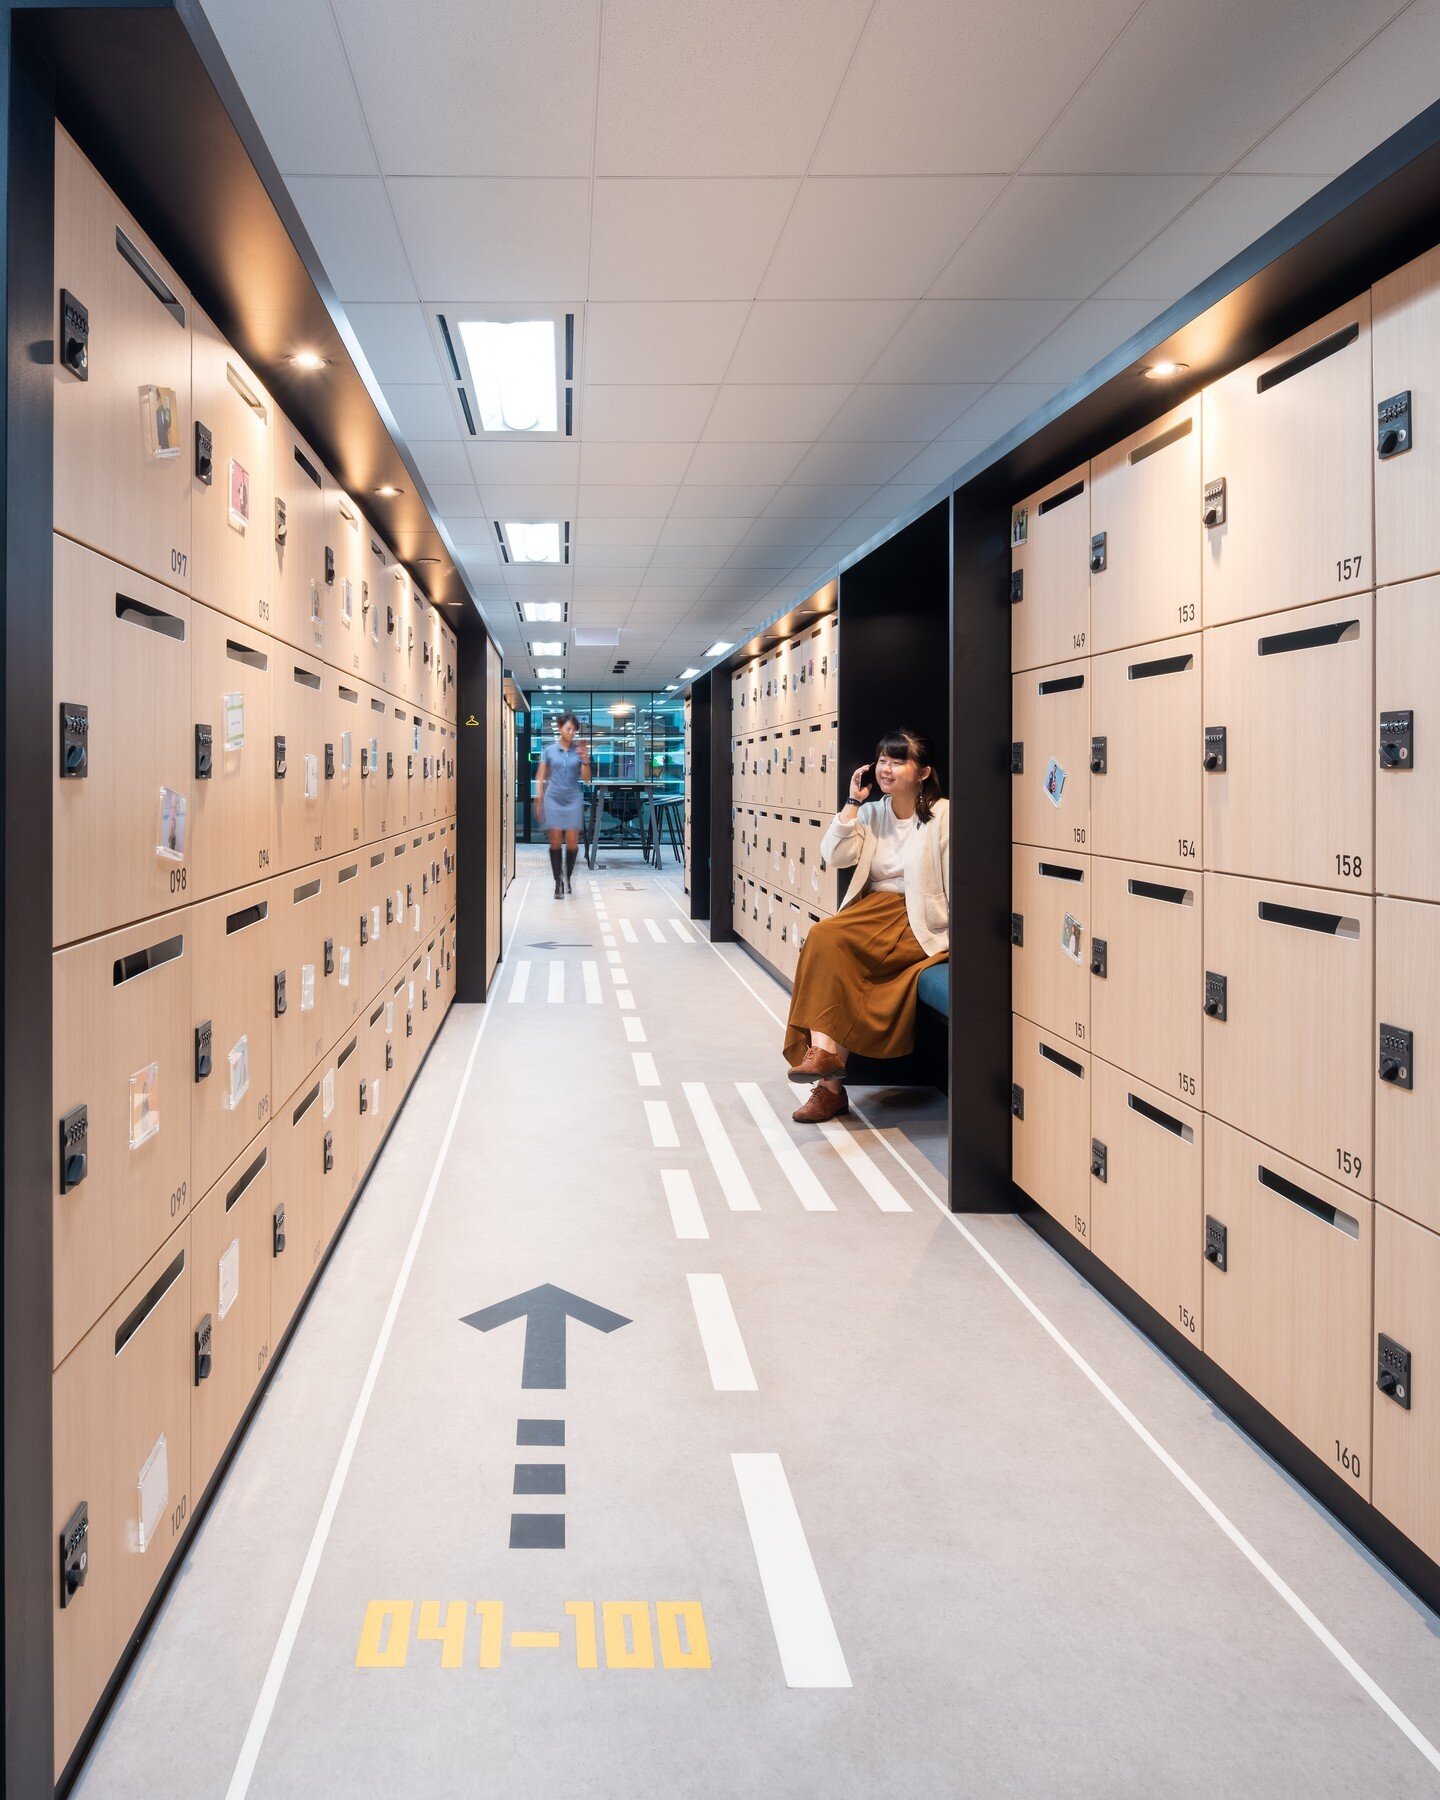 Vinyl flooring can be recycled and reused. For the locker area in CBRE&rsquo;s HK office, we used @TarkettAsia&rsquo;s recycled vinyl flooring from their ReStart recycling program, where they take back vinyl and linoleum after use to give it a second